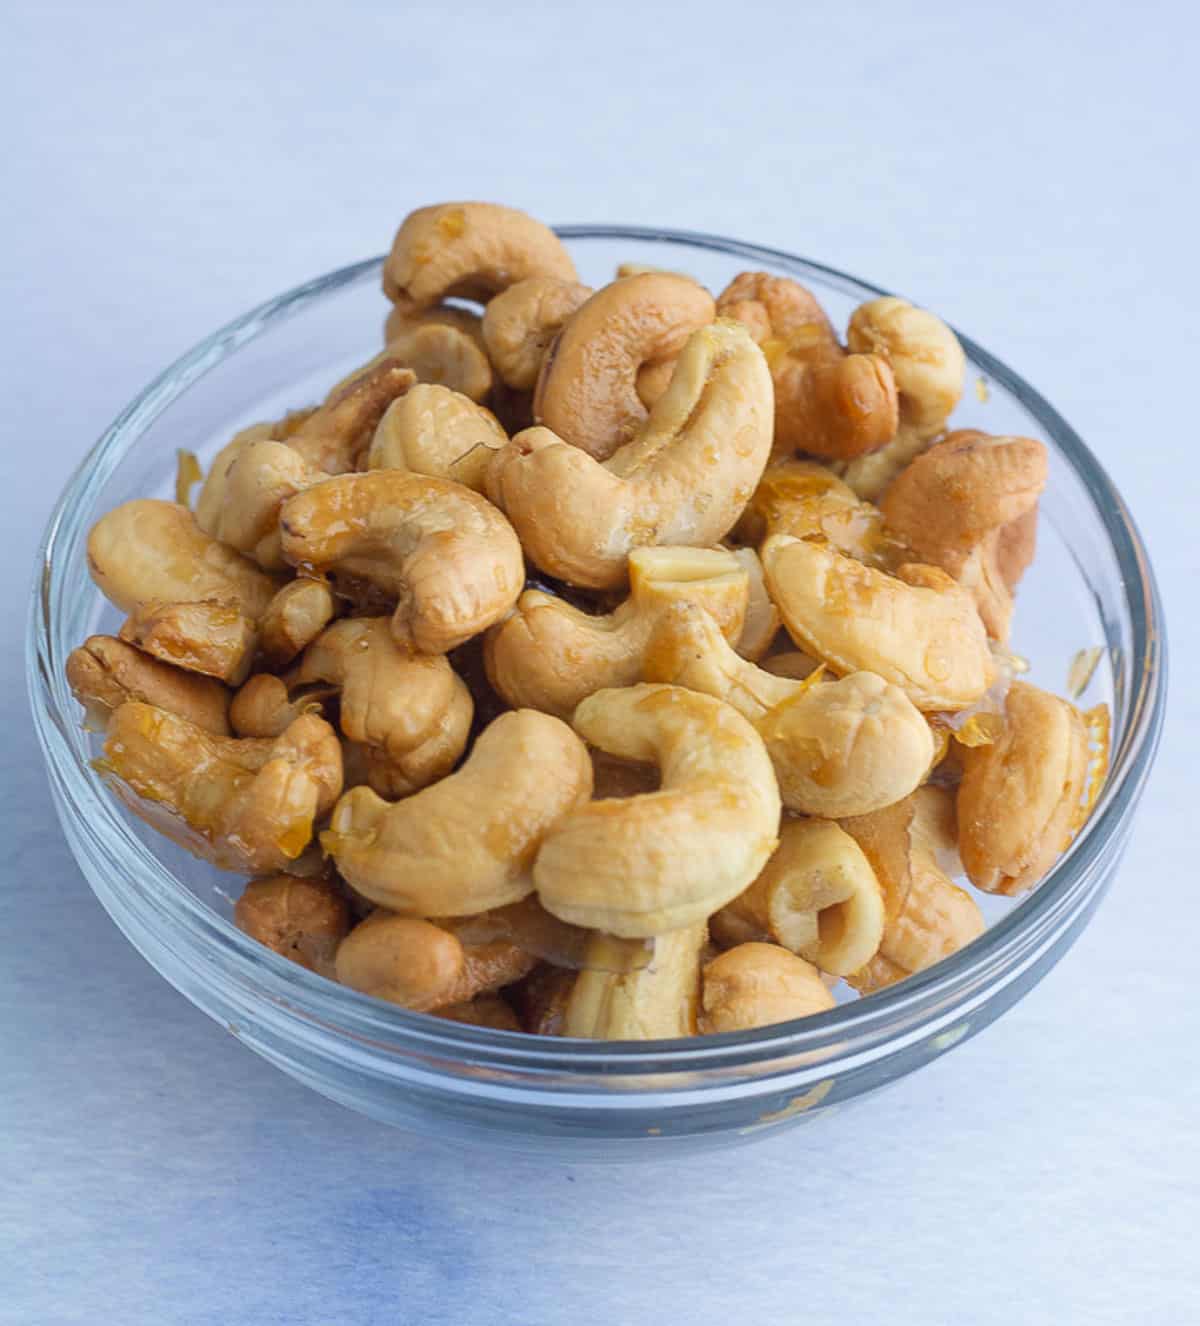 Maple roasted cashews in a glass bowl